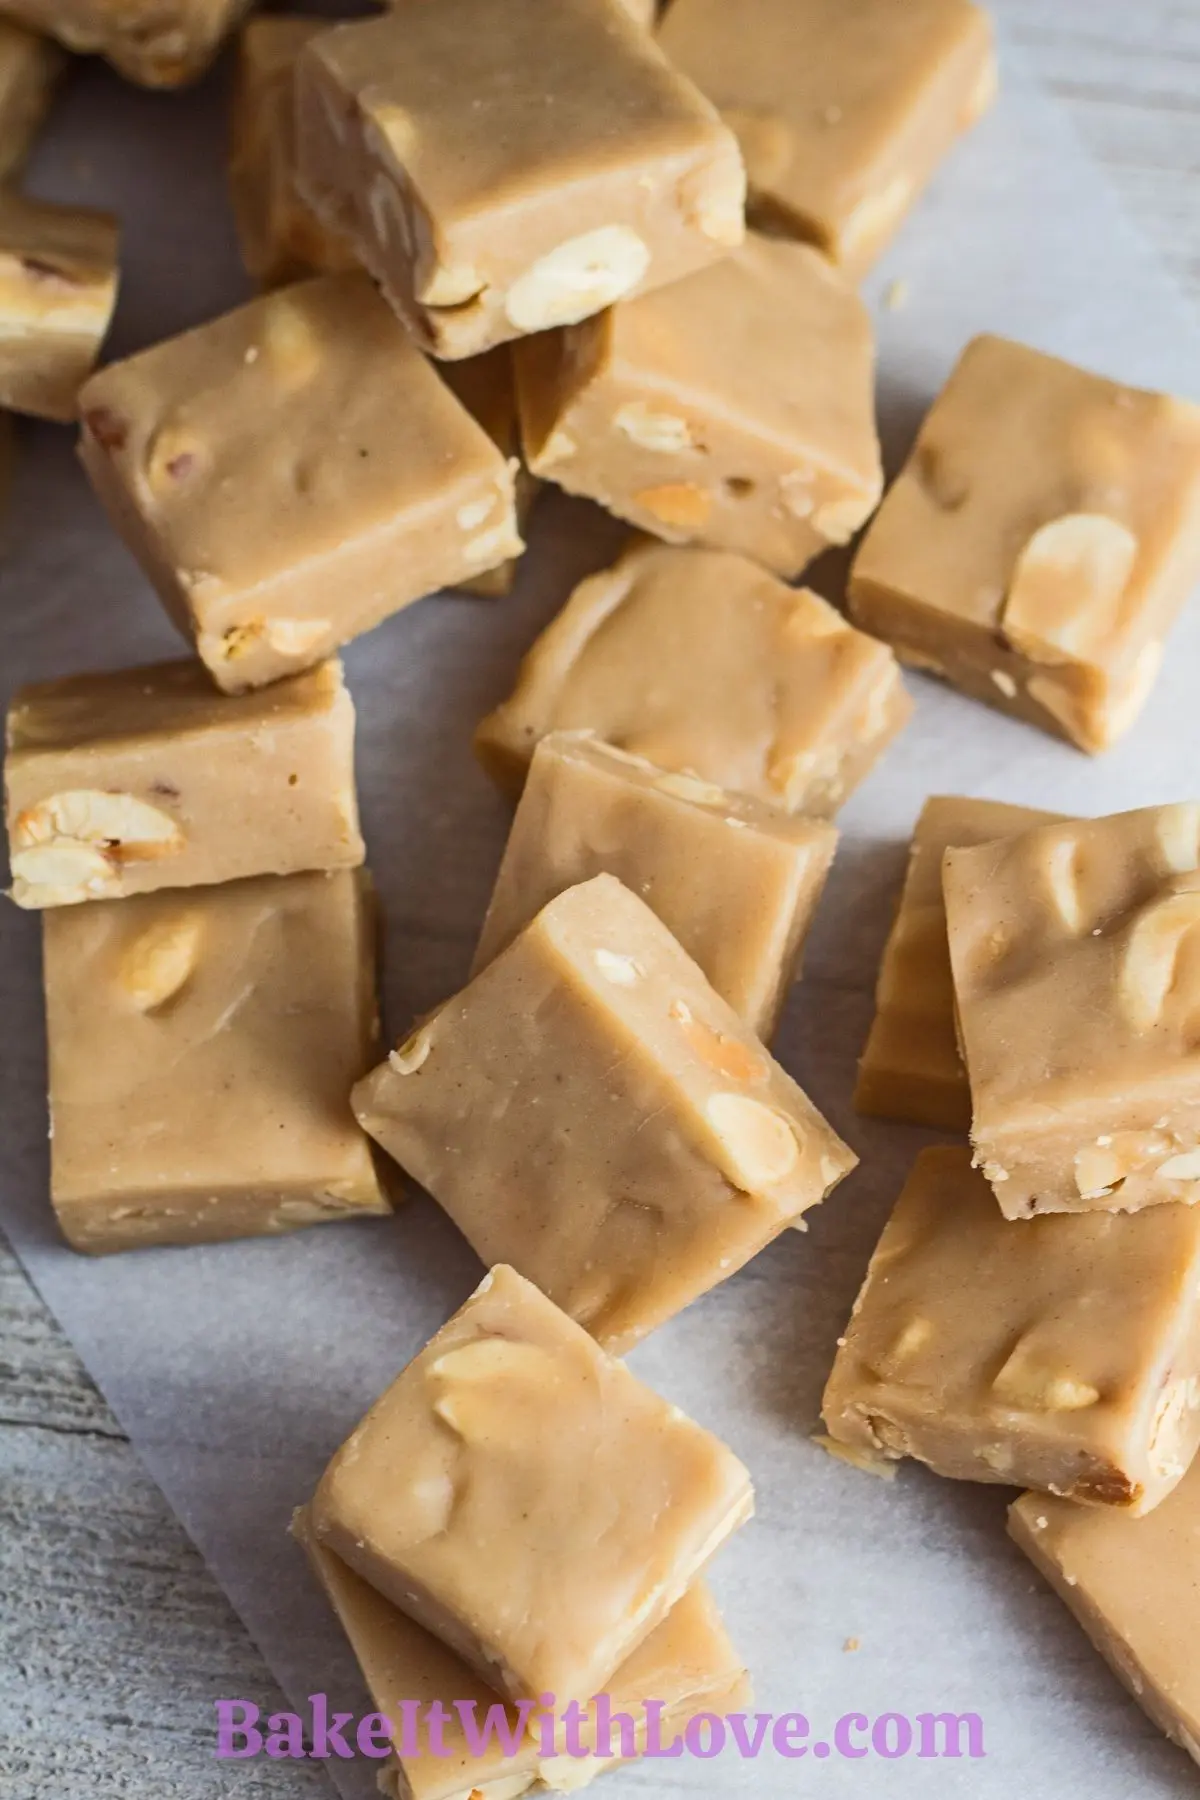 Creamy microwave peanut butter fudge sliced and scattered on parchment paper.